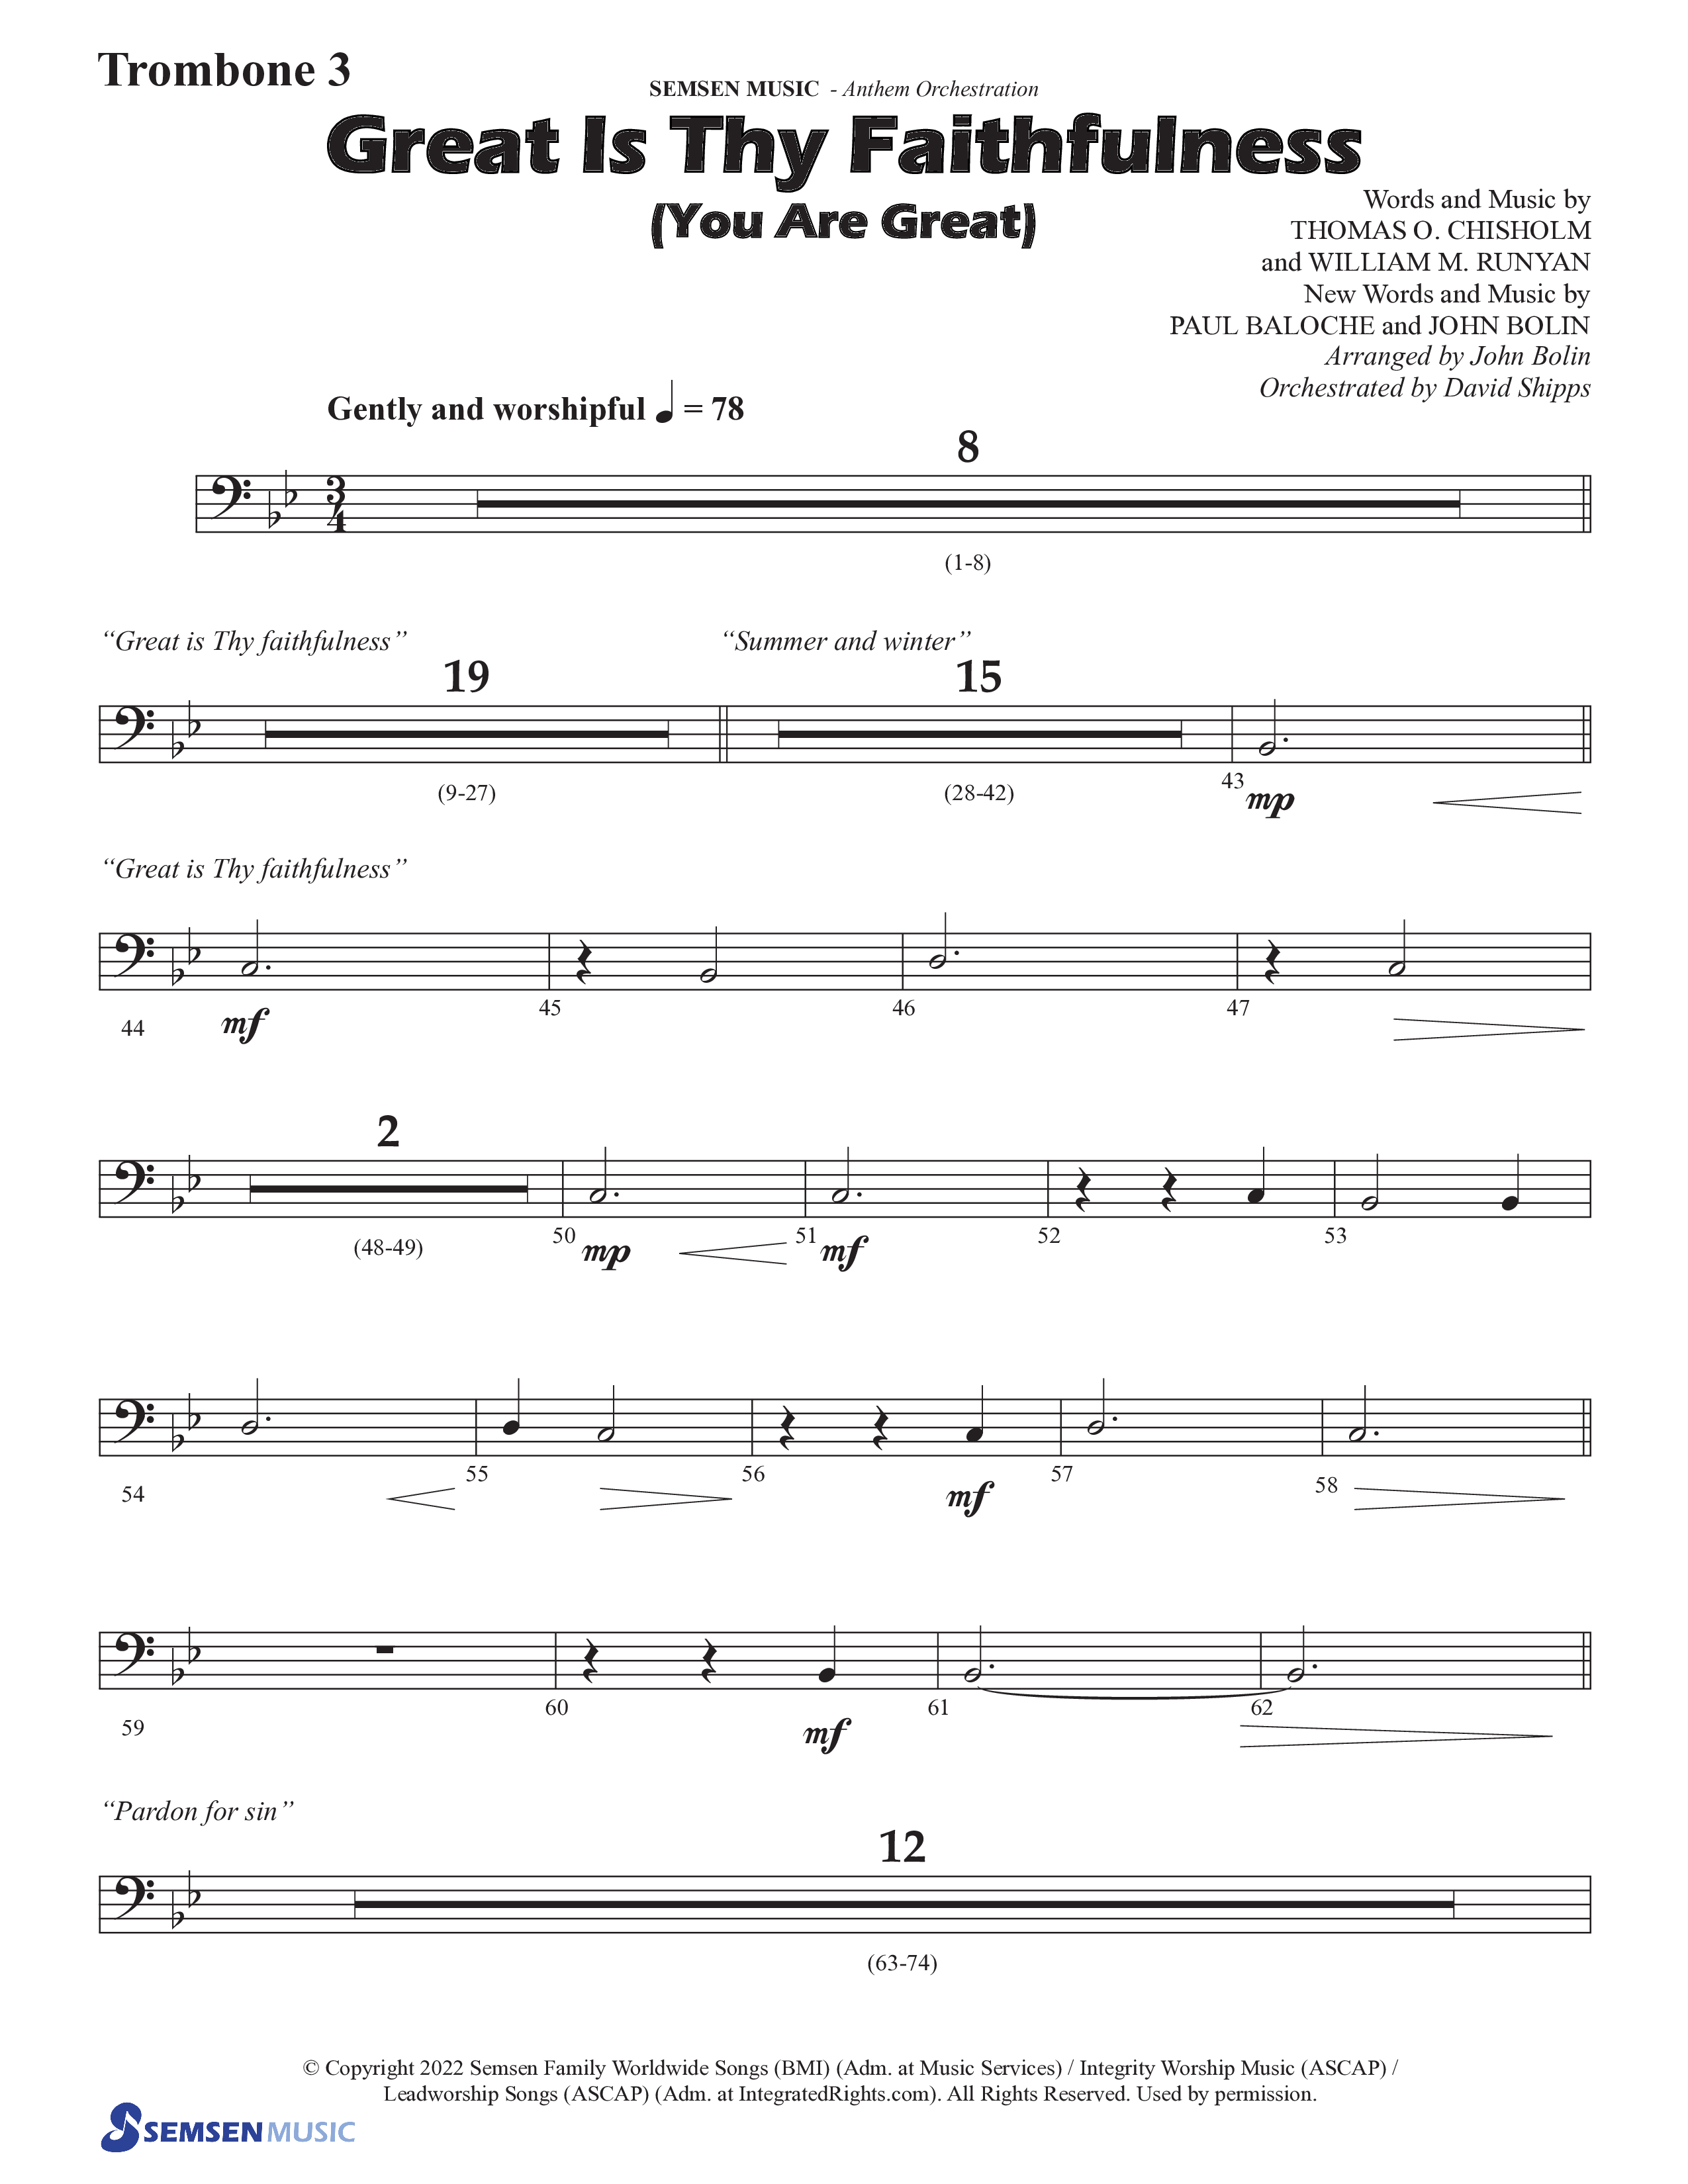 Great Is Thy Faithfulness (You Are Great) (Choral Anthem SATB) Trombone 3 (Semsen Music / Arr. John Bolin / Orch. David Shipps)